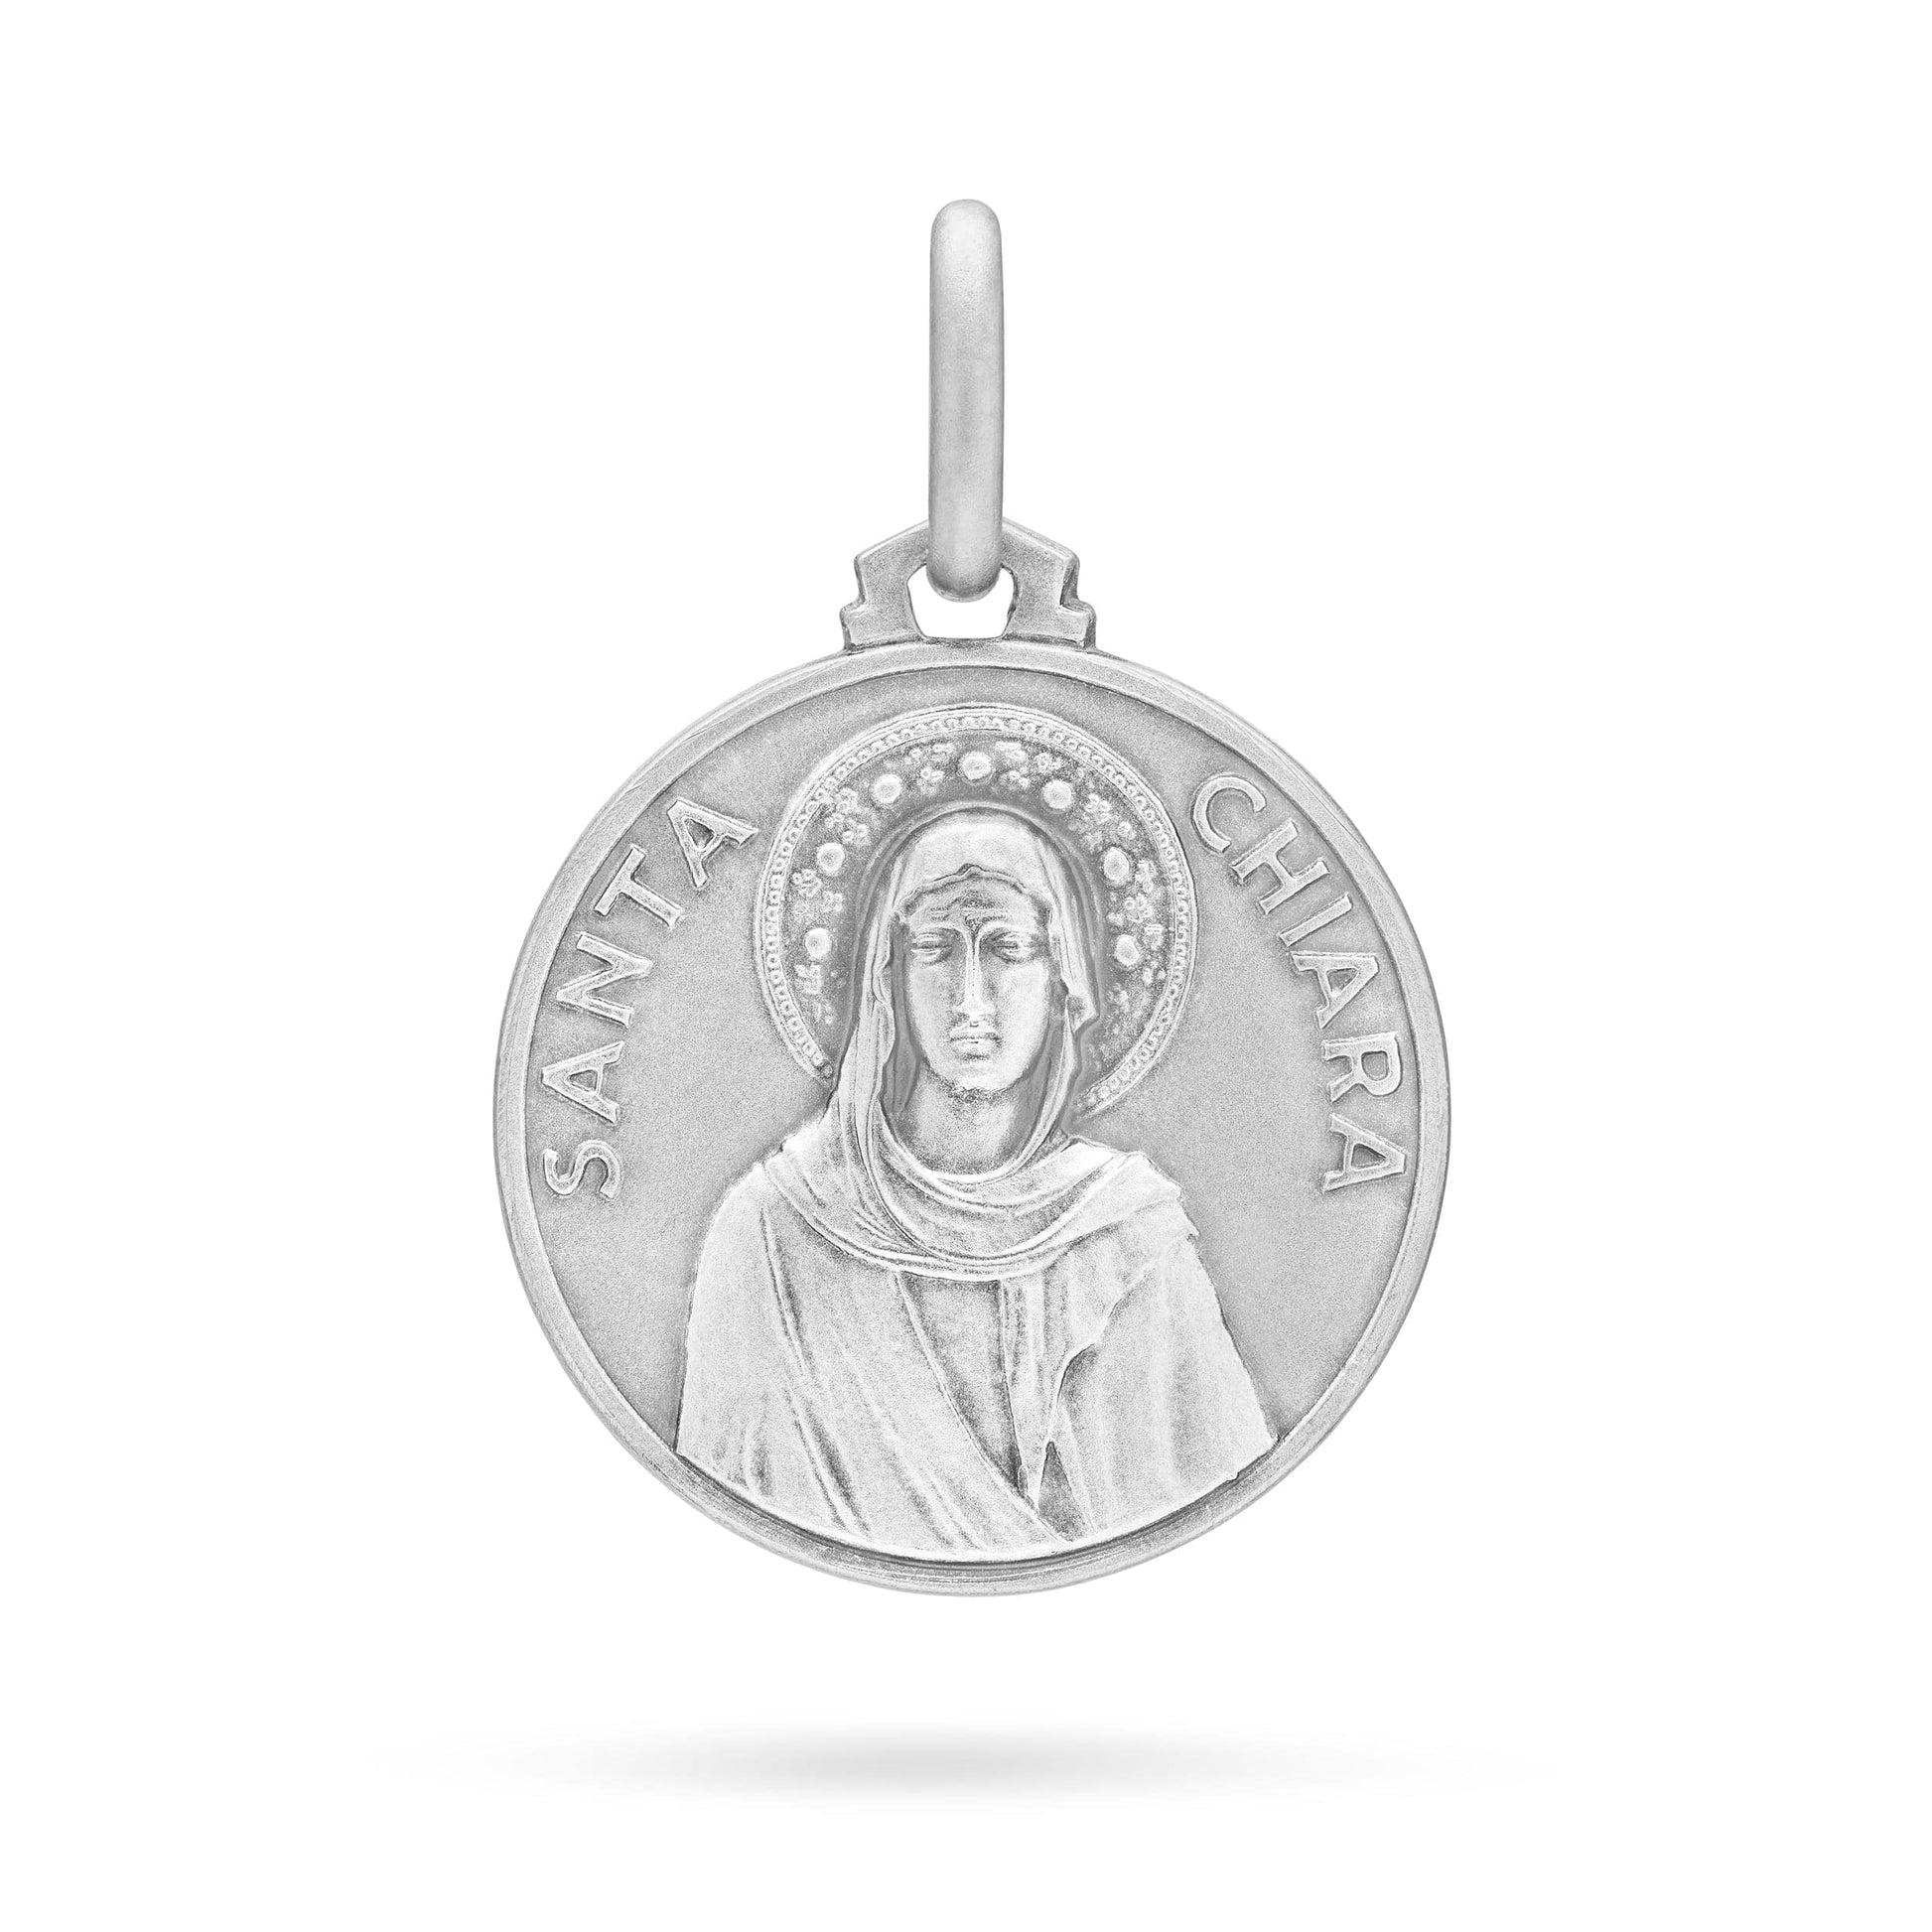 MONDO CATTOLICO Medal 14 mm (0.55 in) Silver medal of Saint Clare of Assisi